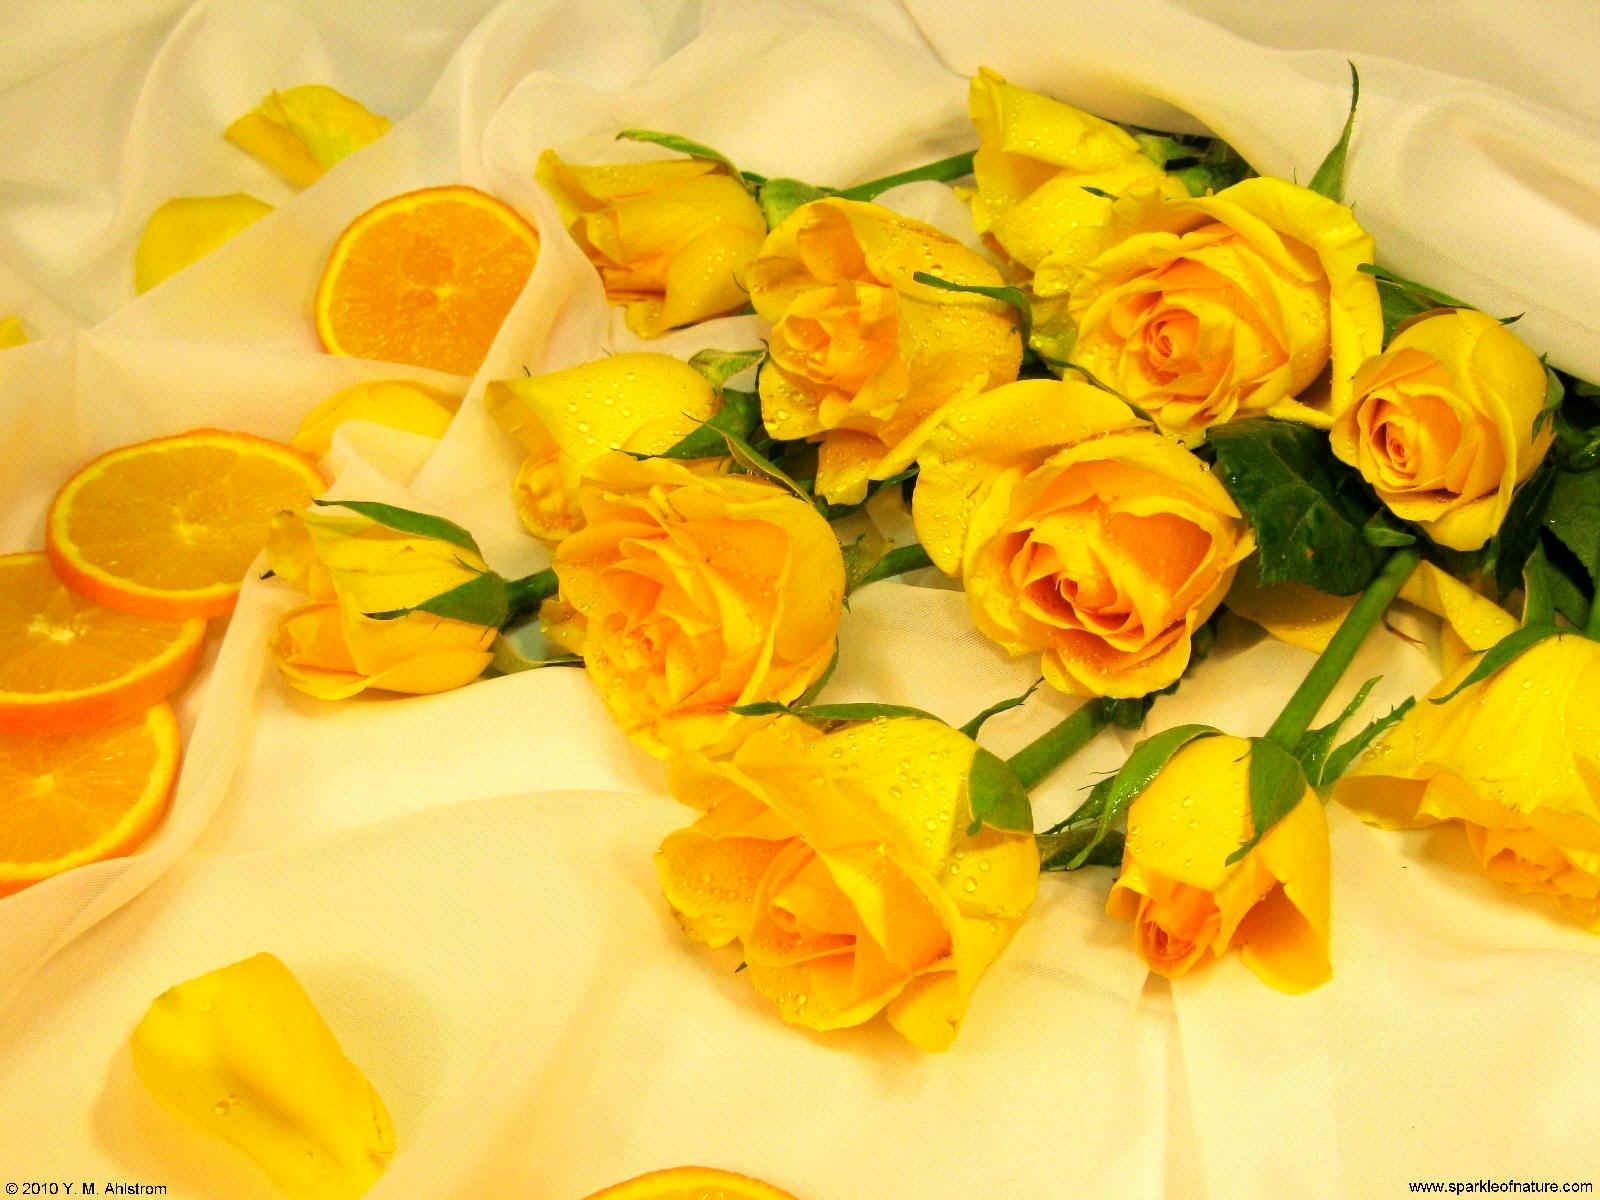 20091_oranges_and_yellow_roses_1600x1200.jpg